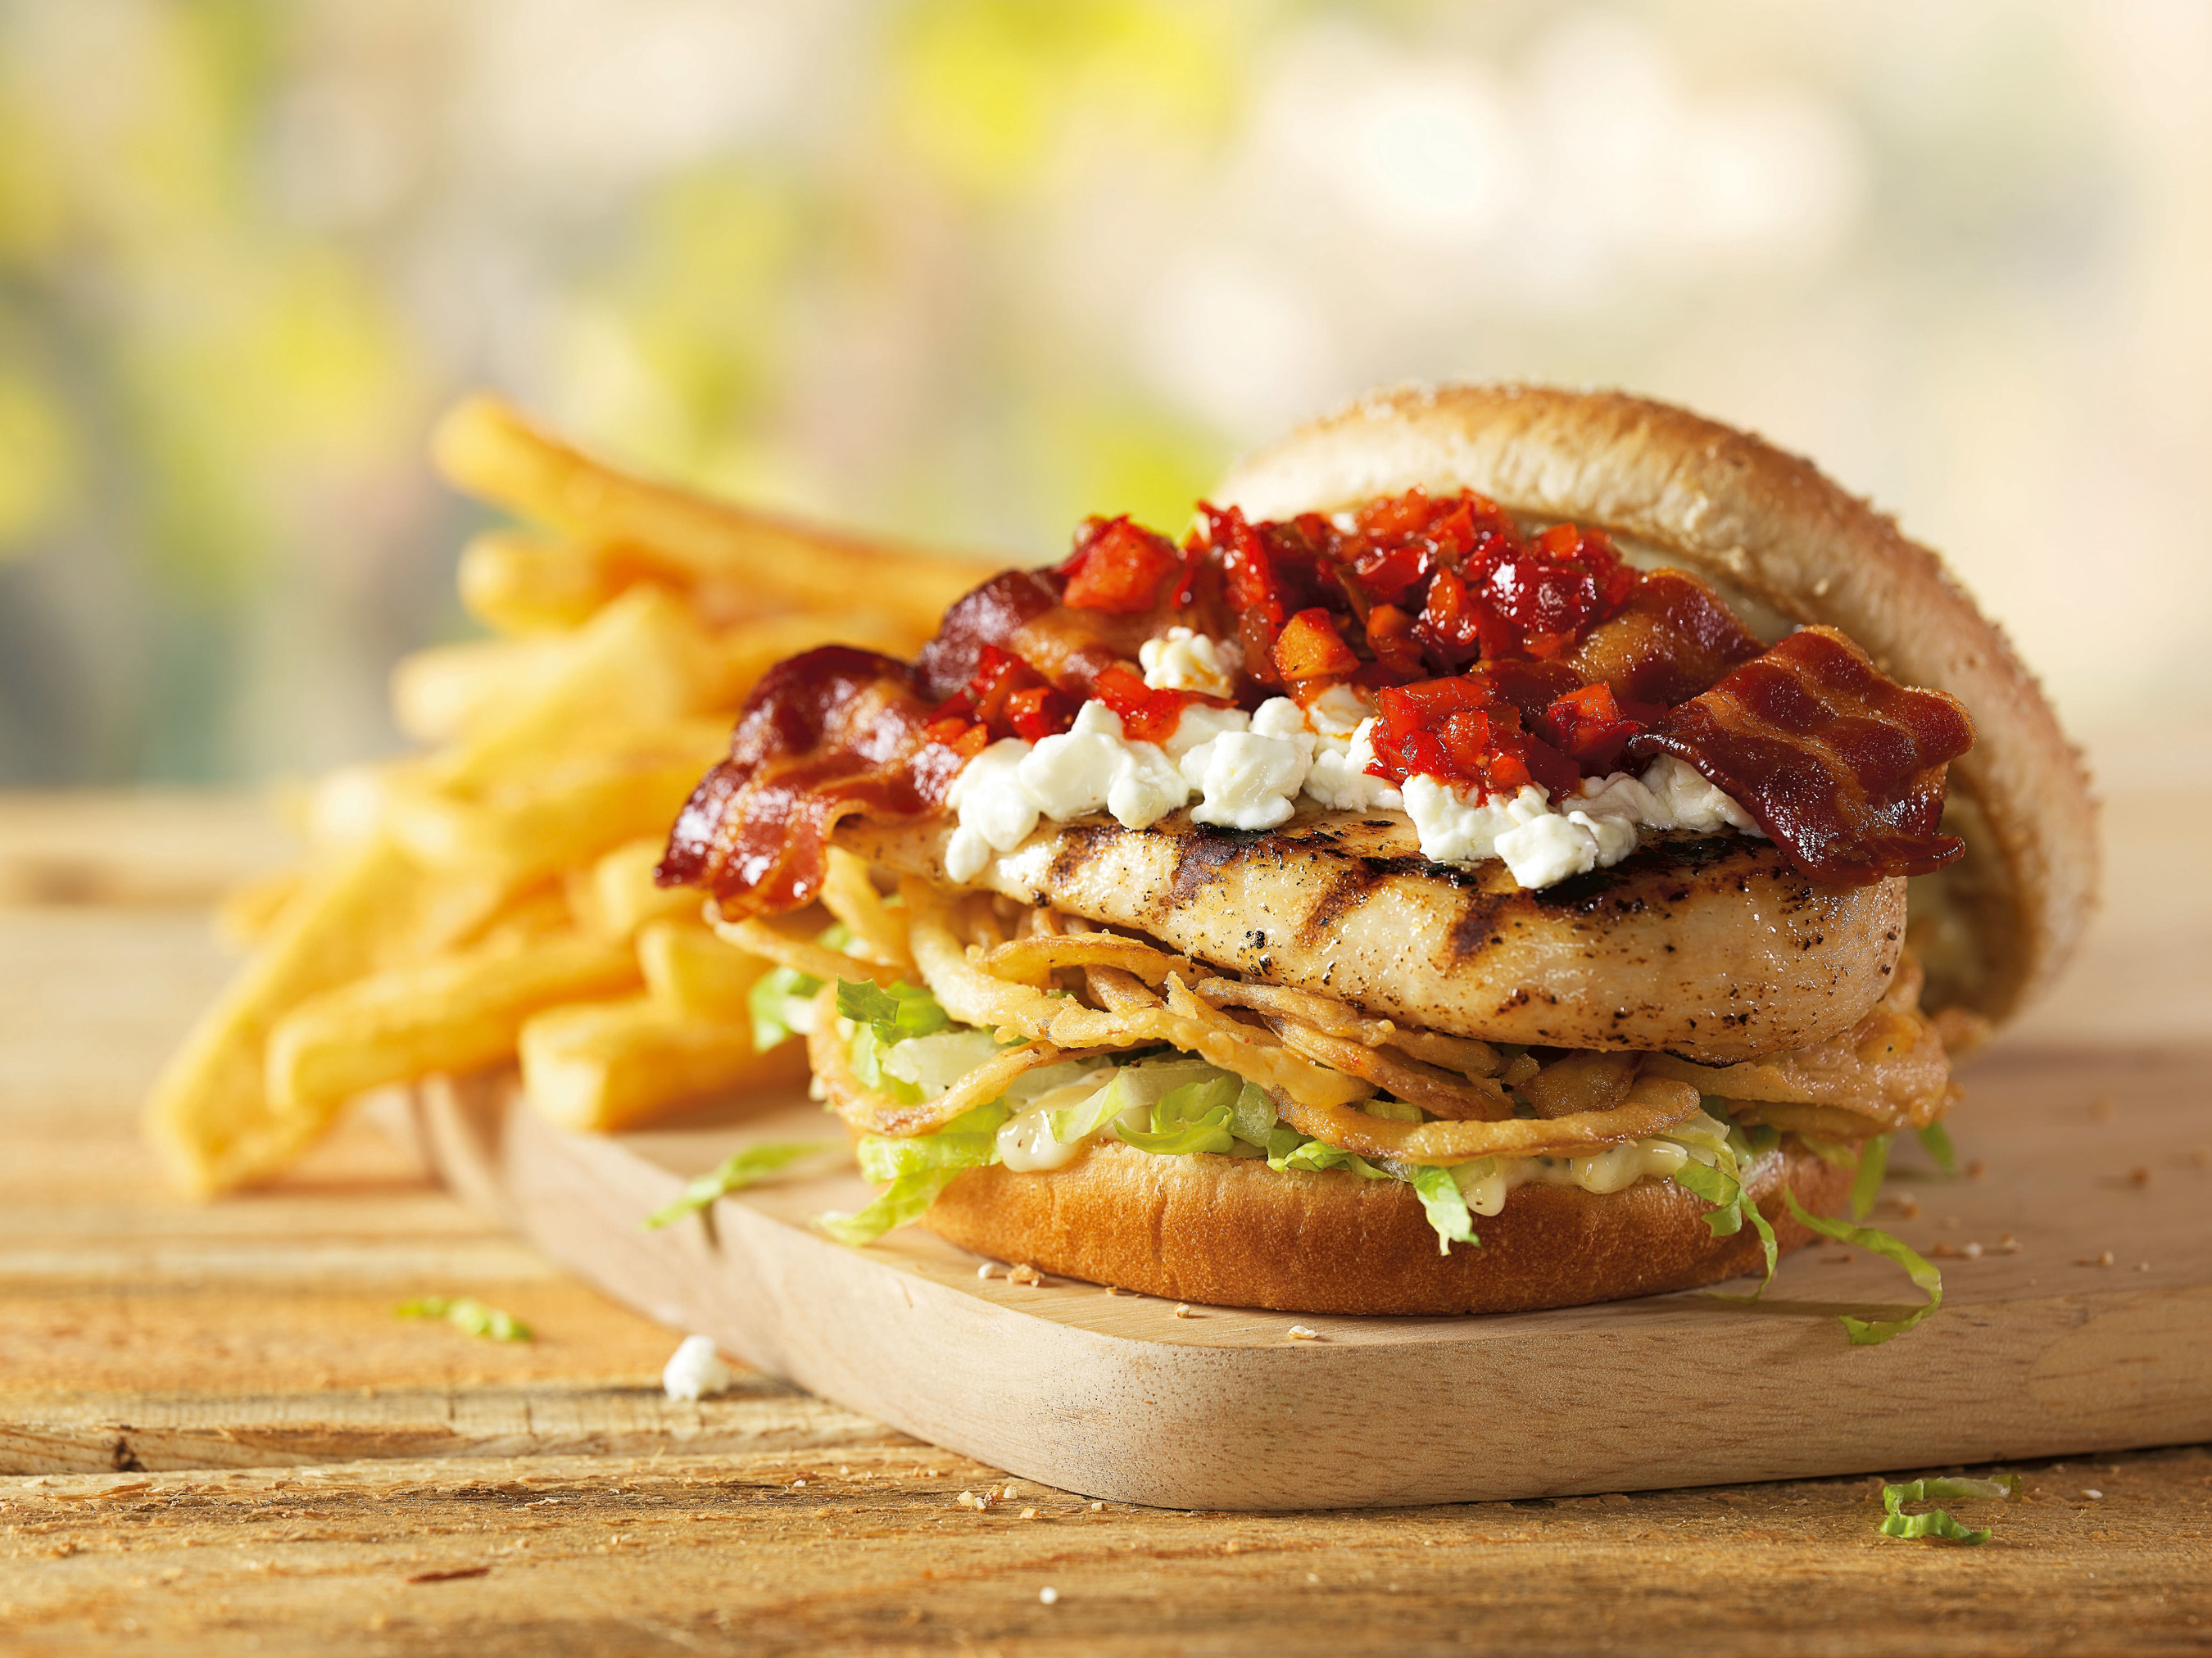 Red Robin Gourmet Burger's new Spring Chicken Burger, available for a limited time, is a tasty combination of fire grilled chicken topped with bacon strips, goat cheese, sweet pepper salsa, crunchy onion straws and lettuce, served with roasted garlic aioli on a whole grain bun.